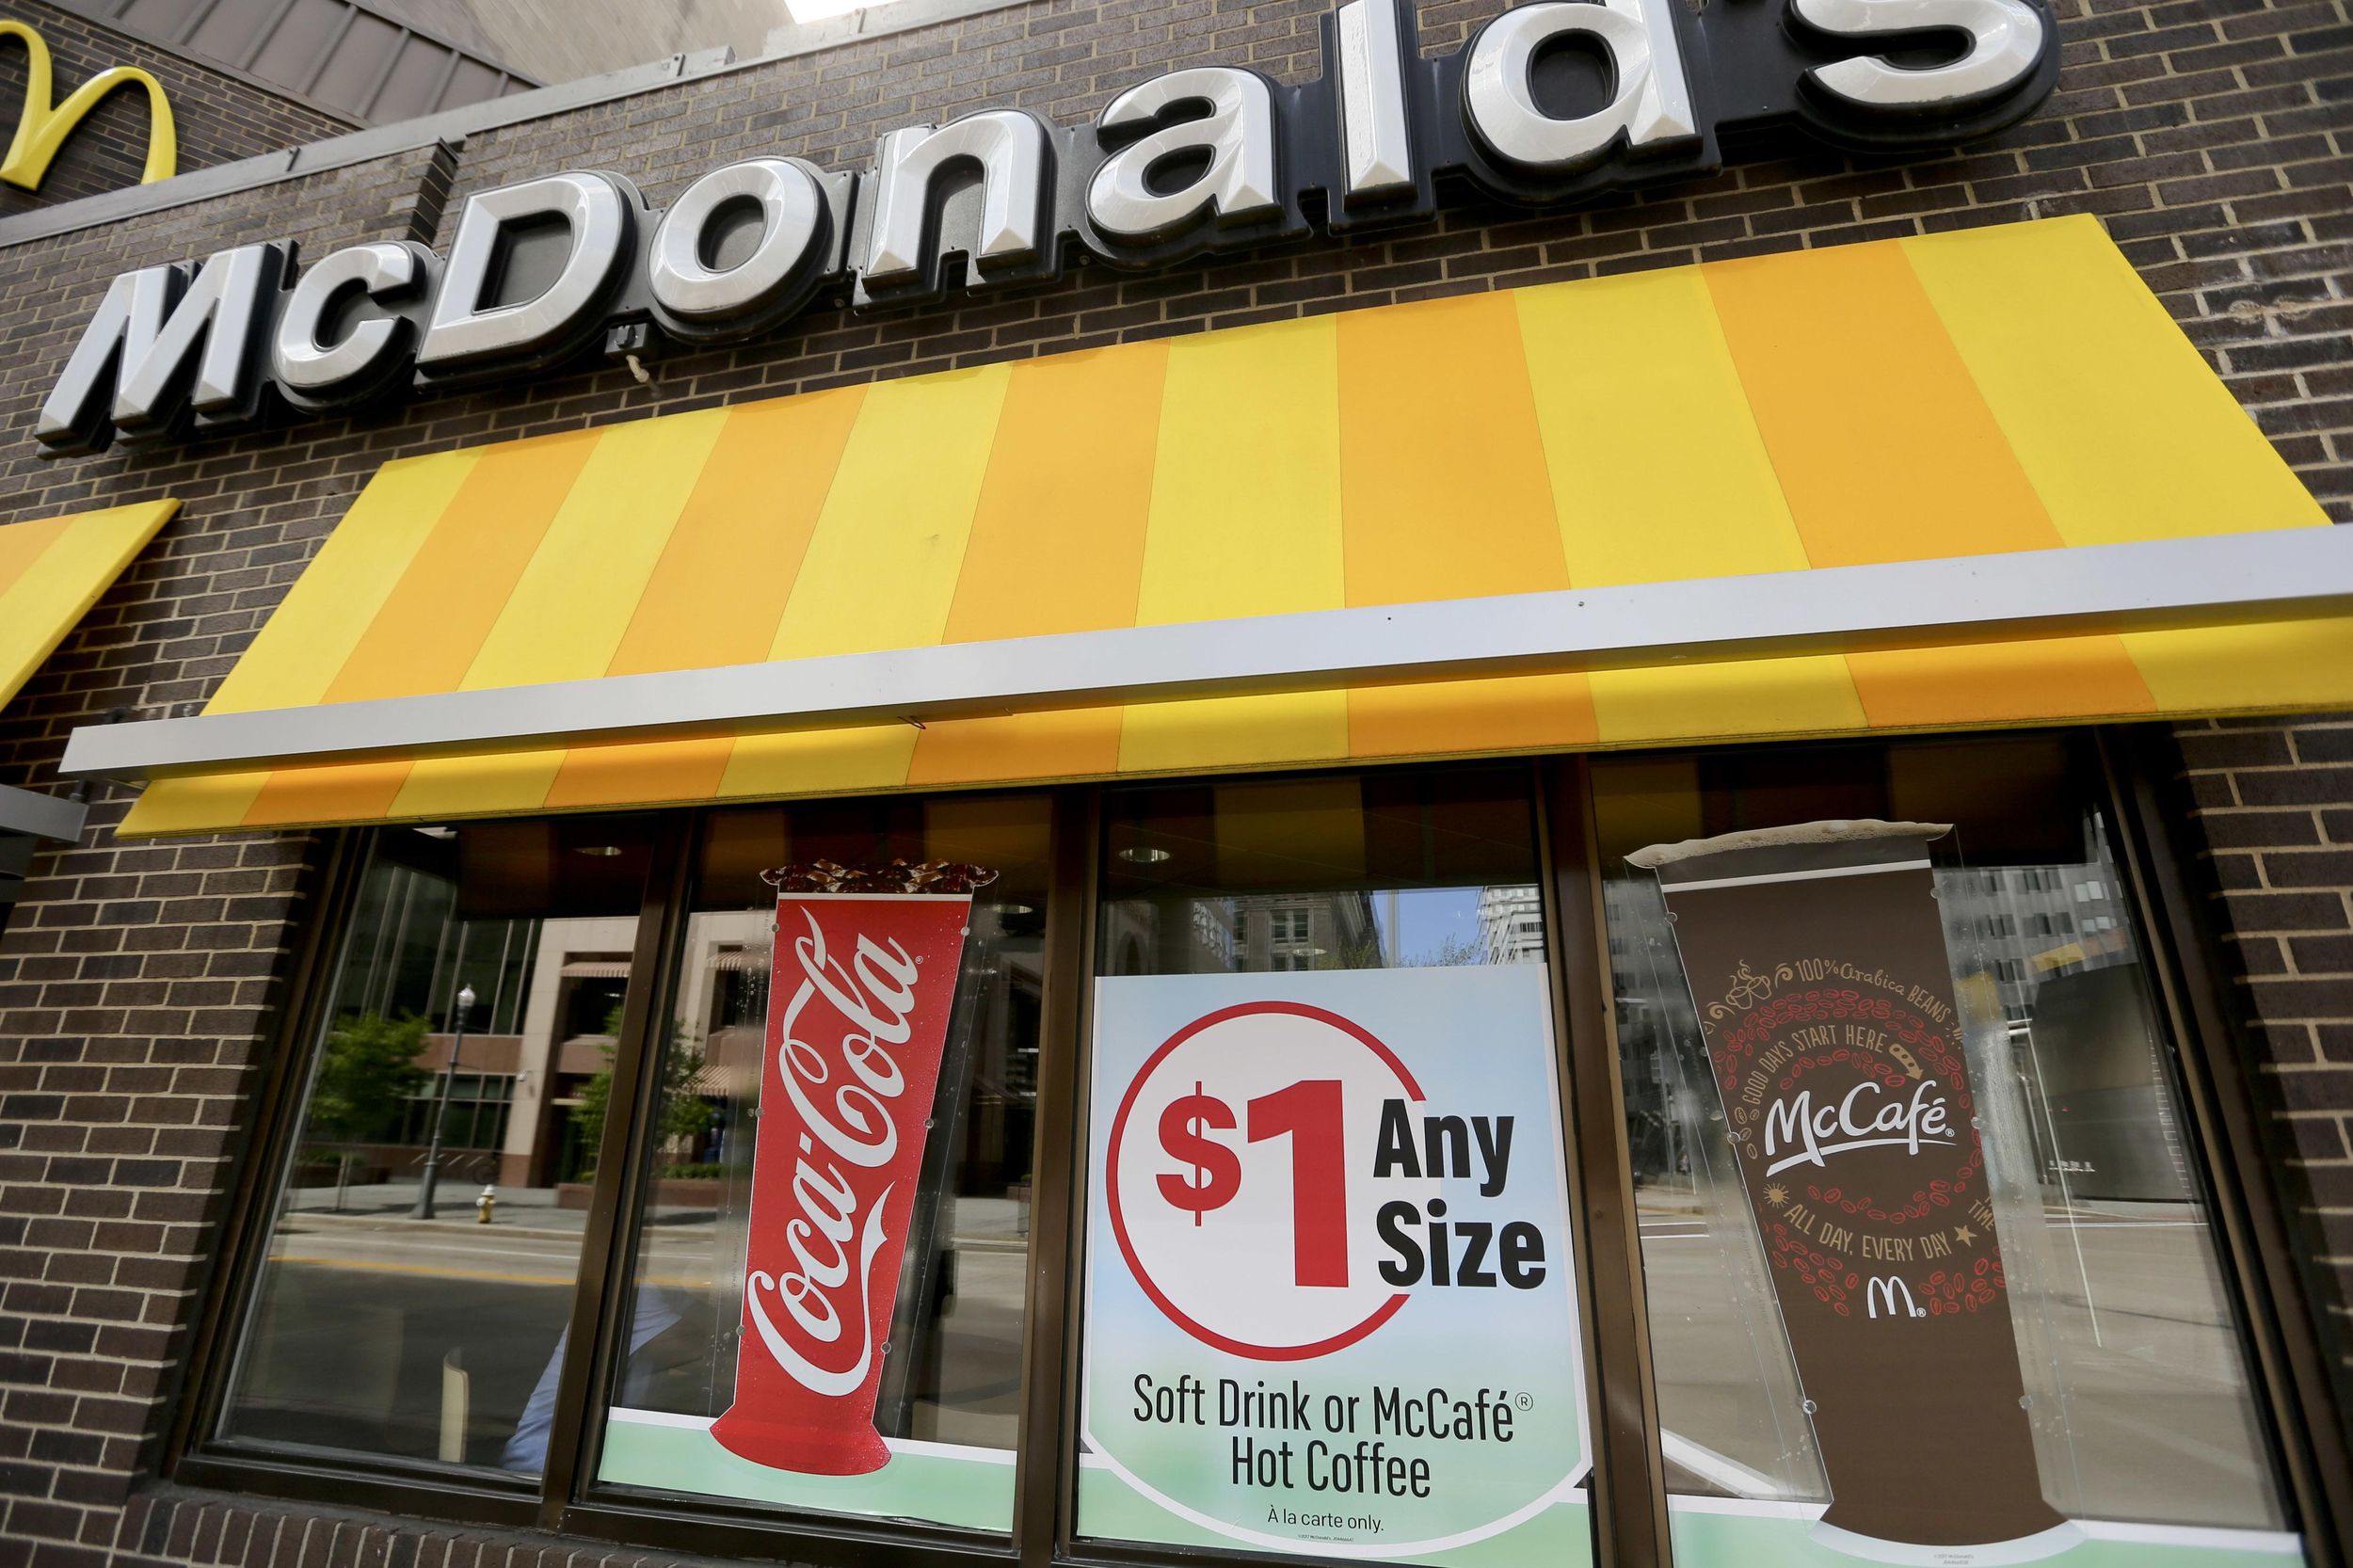 McDonald’s shareholder meeting brings roar of protests but few surprises The SpokesmanReview